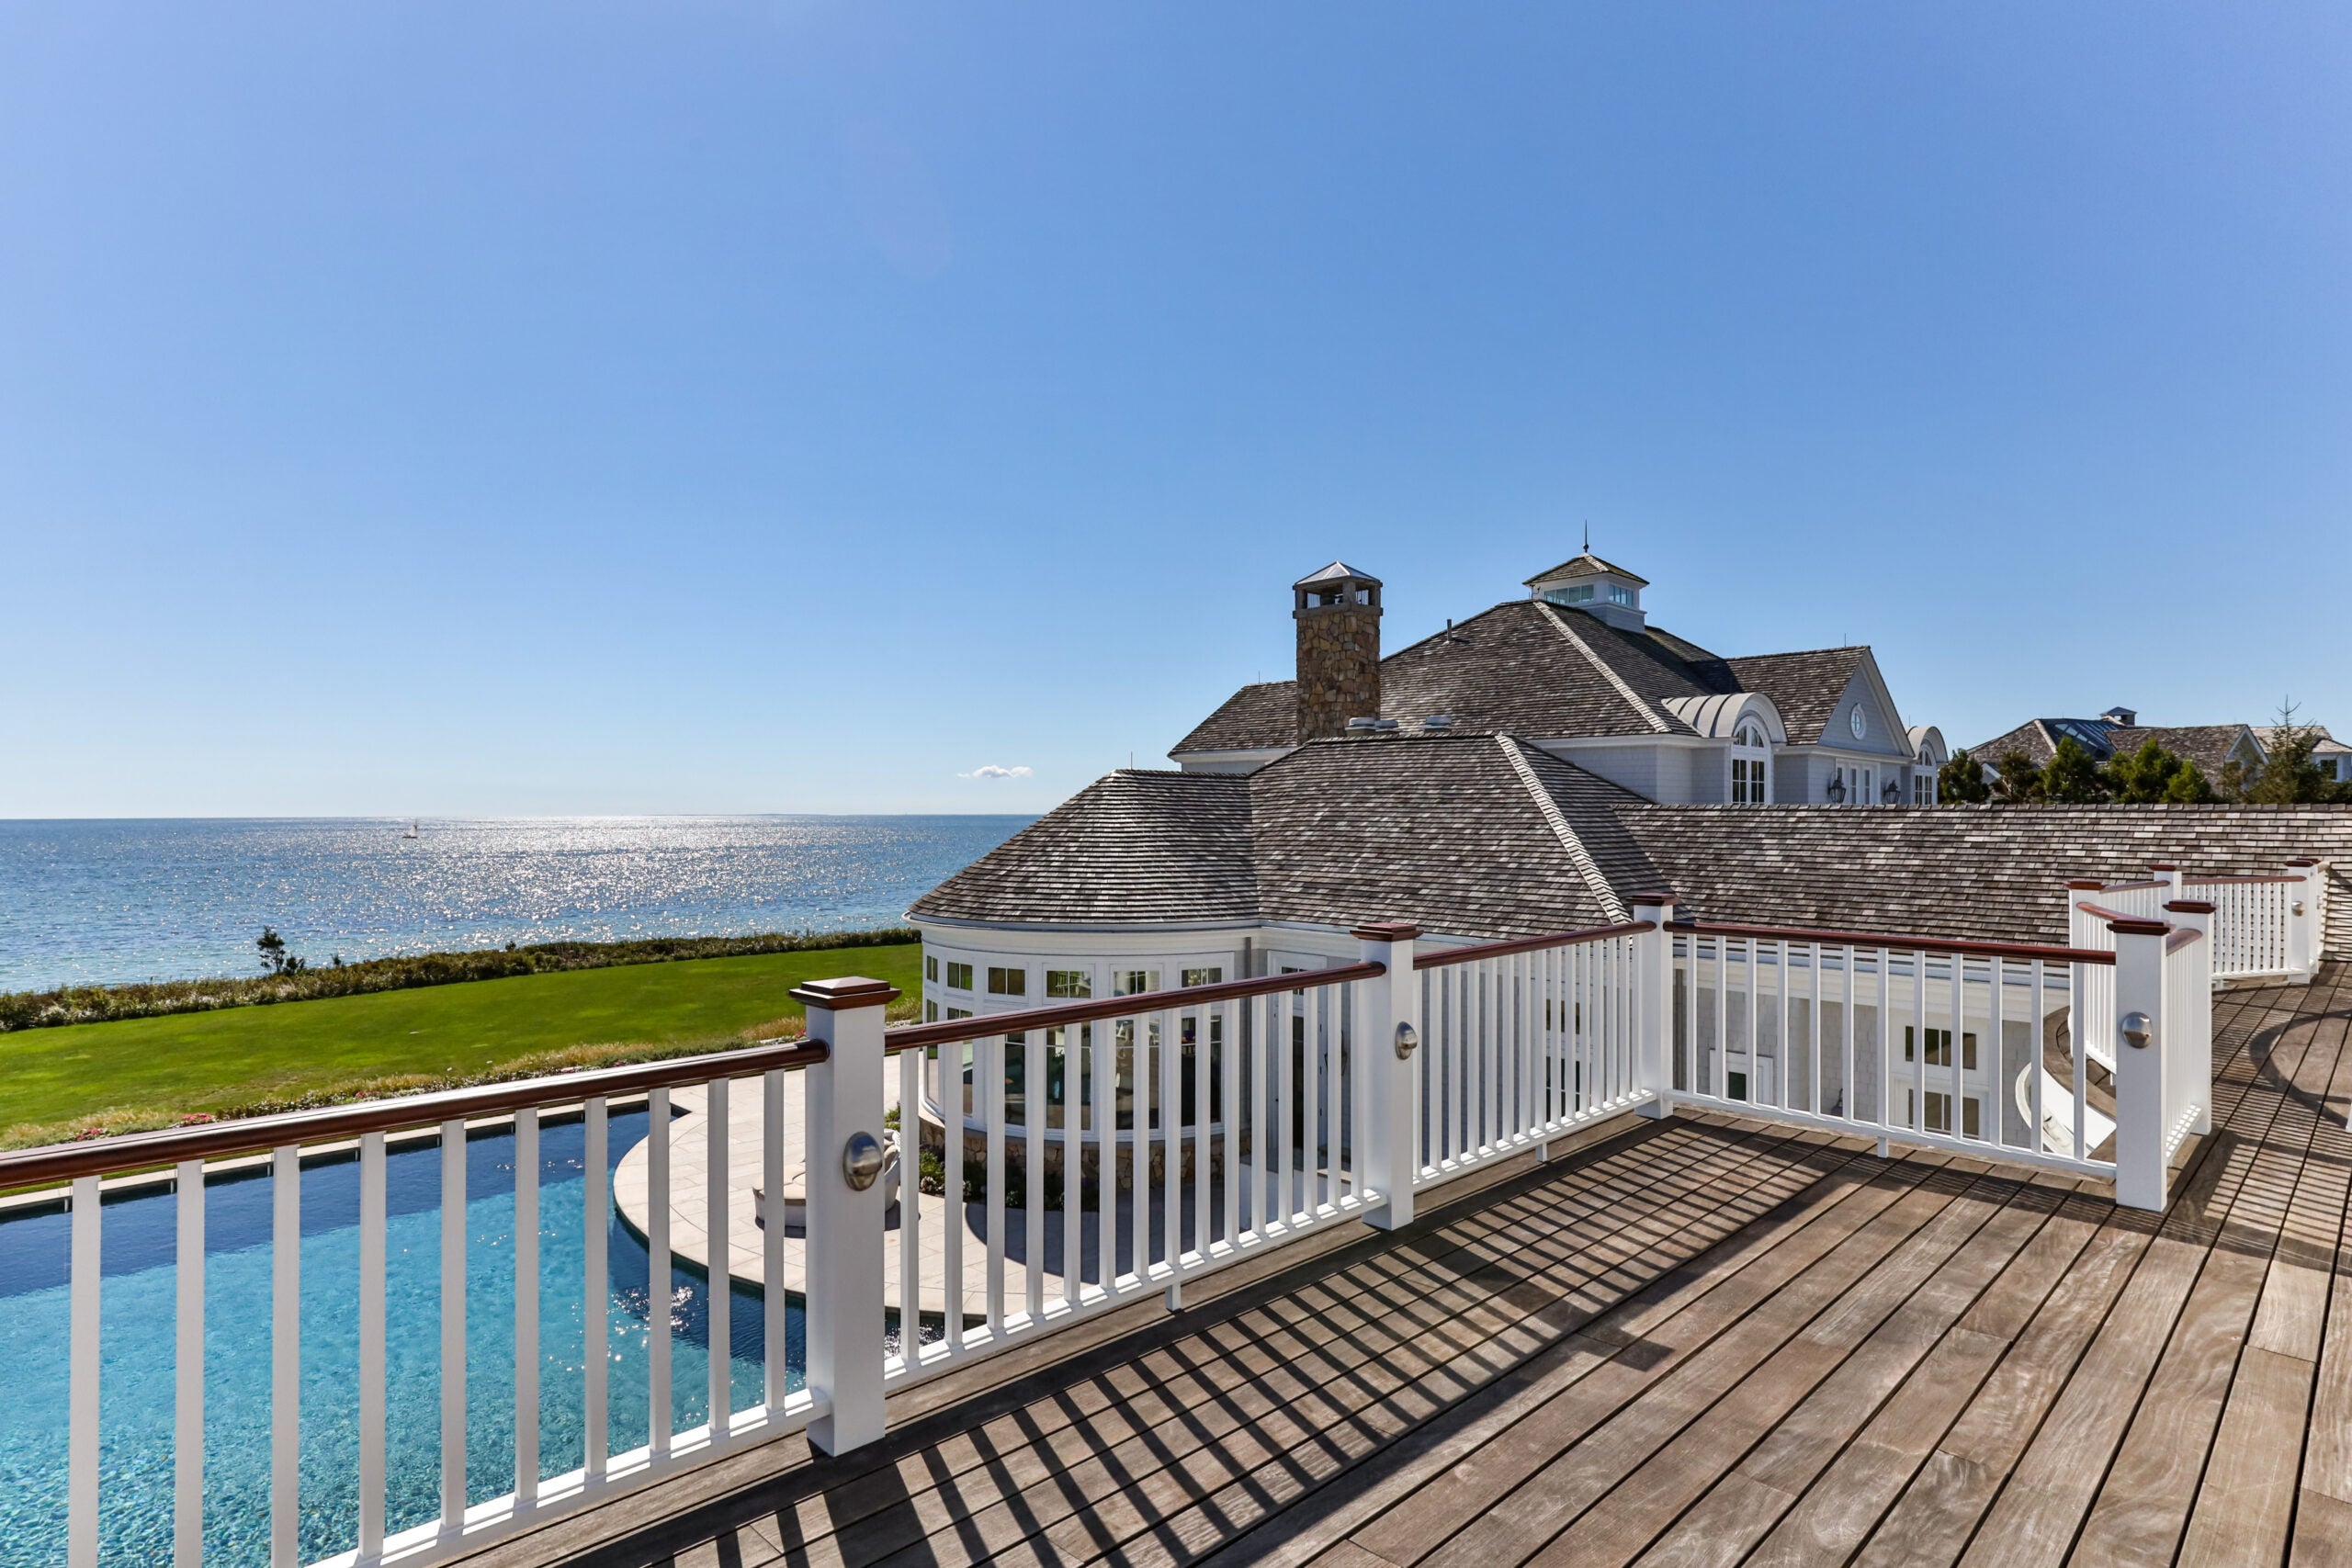 A wood deck with white balusters and dark wood railings looks out over the pool, the lawn, and to the sea. The sky is nearly cloudless. Off to the right, there is one of two homes on the property.